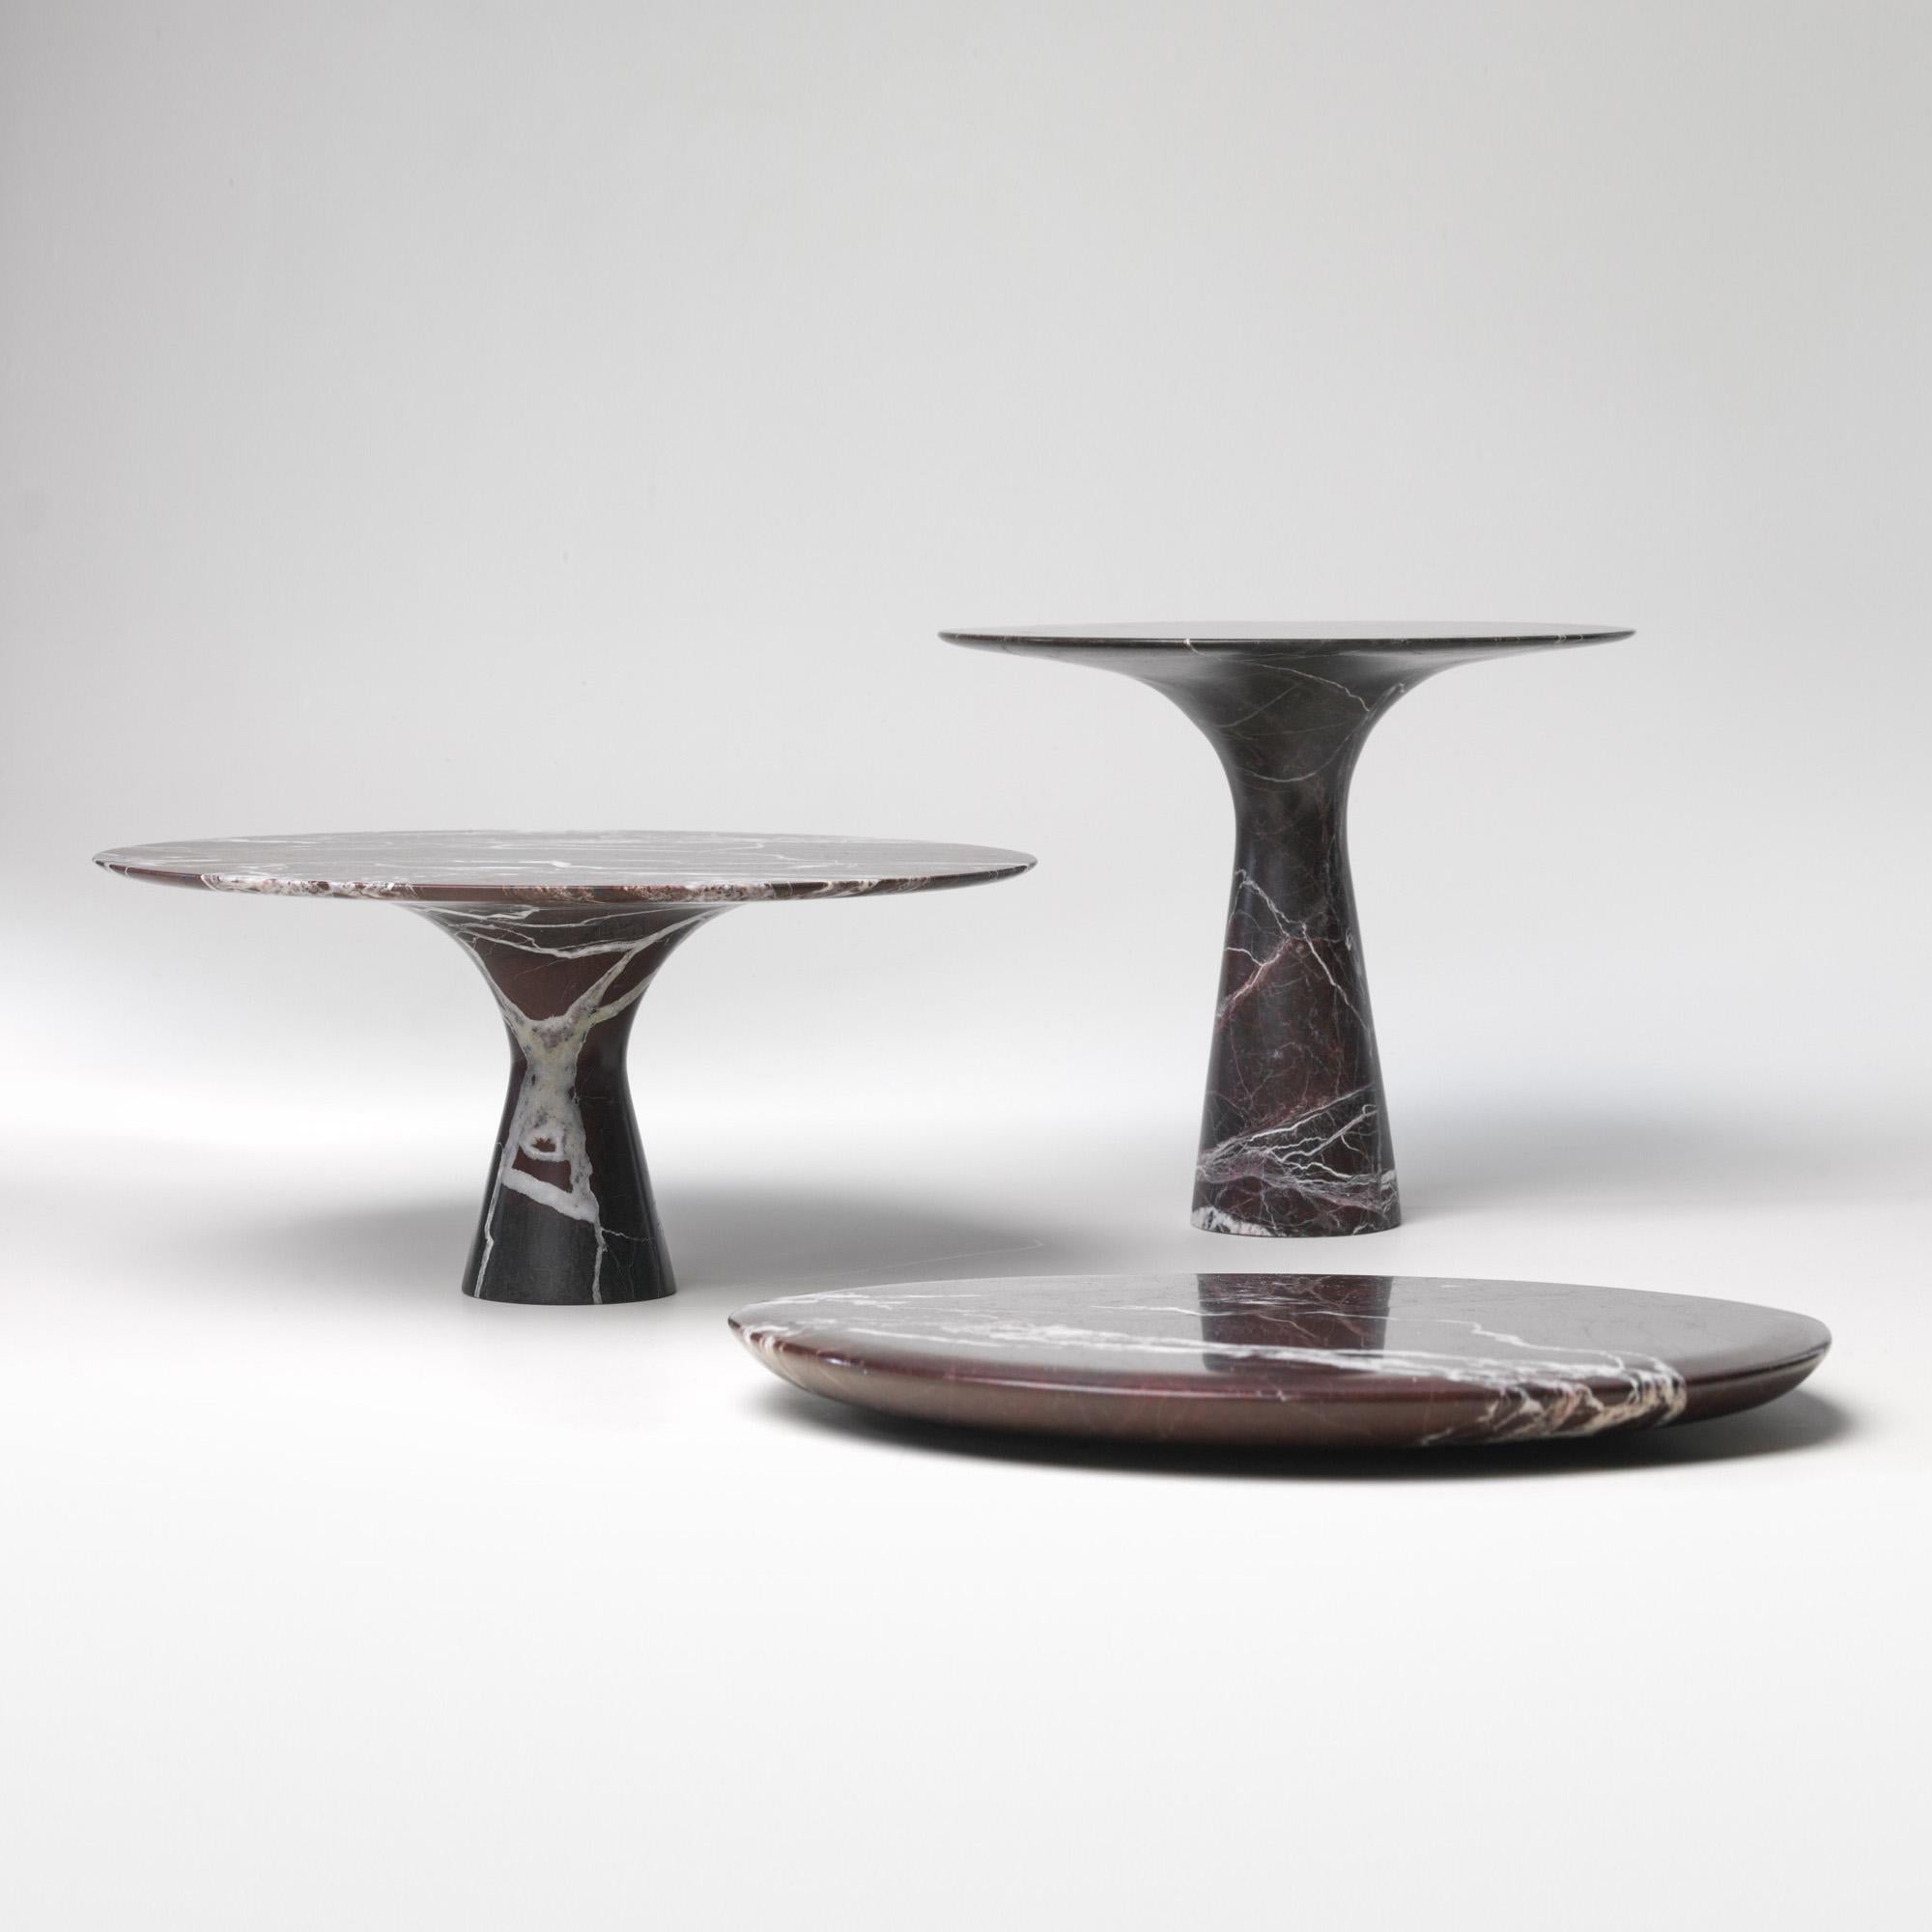 Set of 3 Refined Contemporary marble rosso lepanto marble cake stands and plate
Signed by Leo Aerts.
Dimensions: 
D 26 x H 22.5 cm 
D 32 x H 15 cm
D 32 x H 2 cm
Material: Rosso Lepanto marble
Technique: Polished, carved. 

Available in